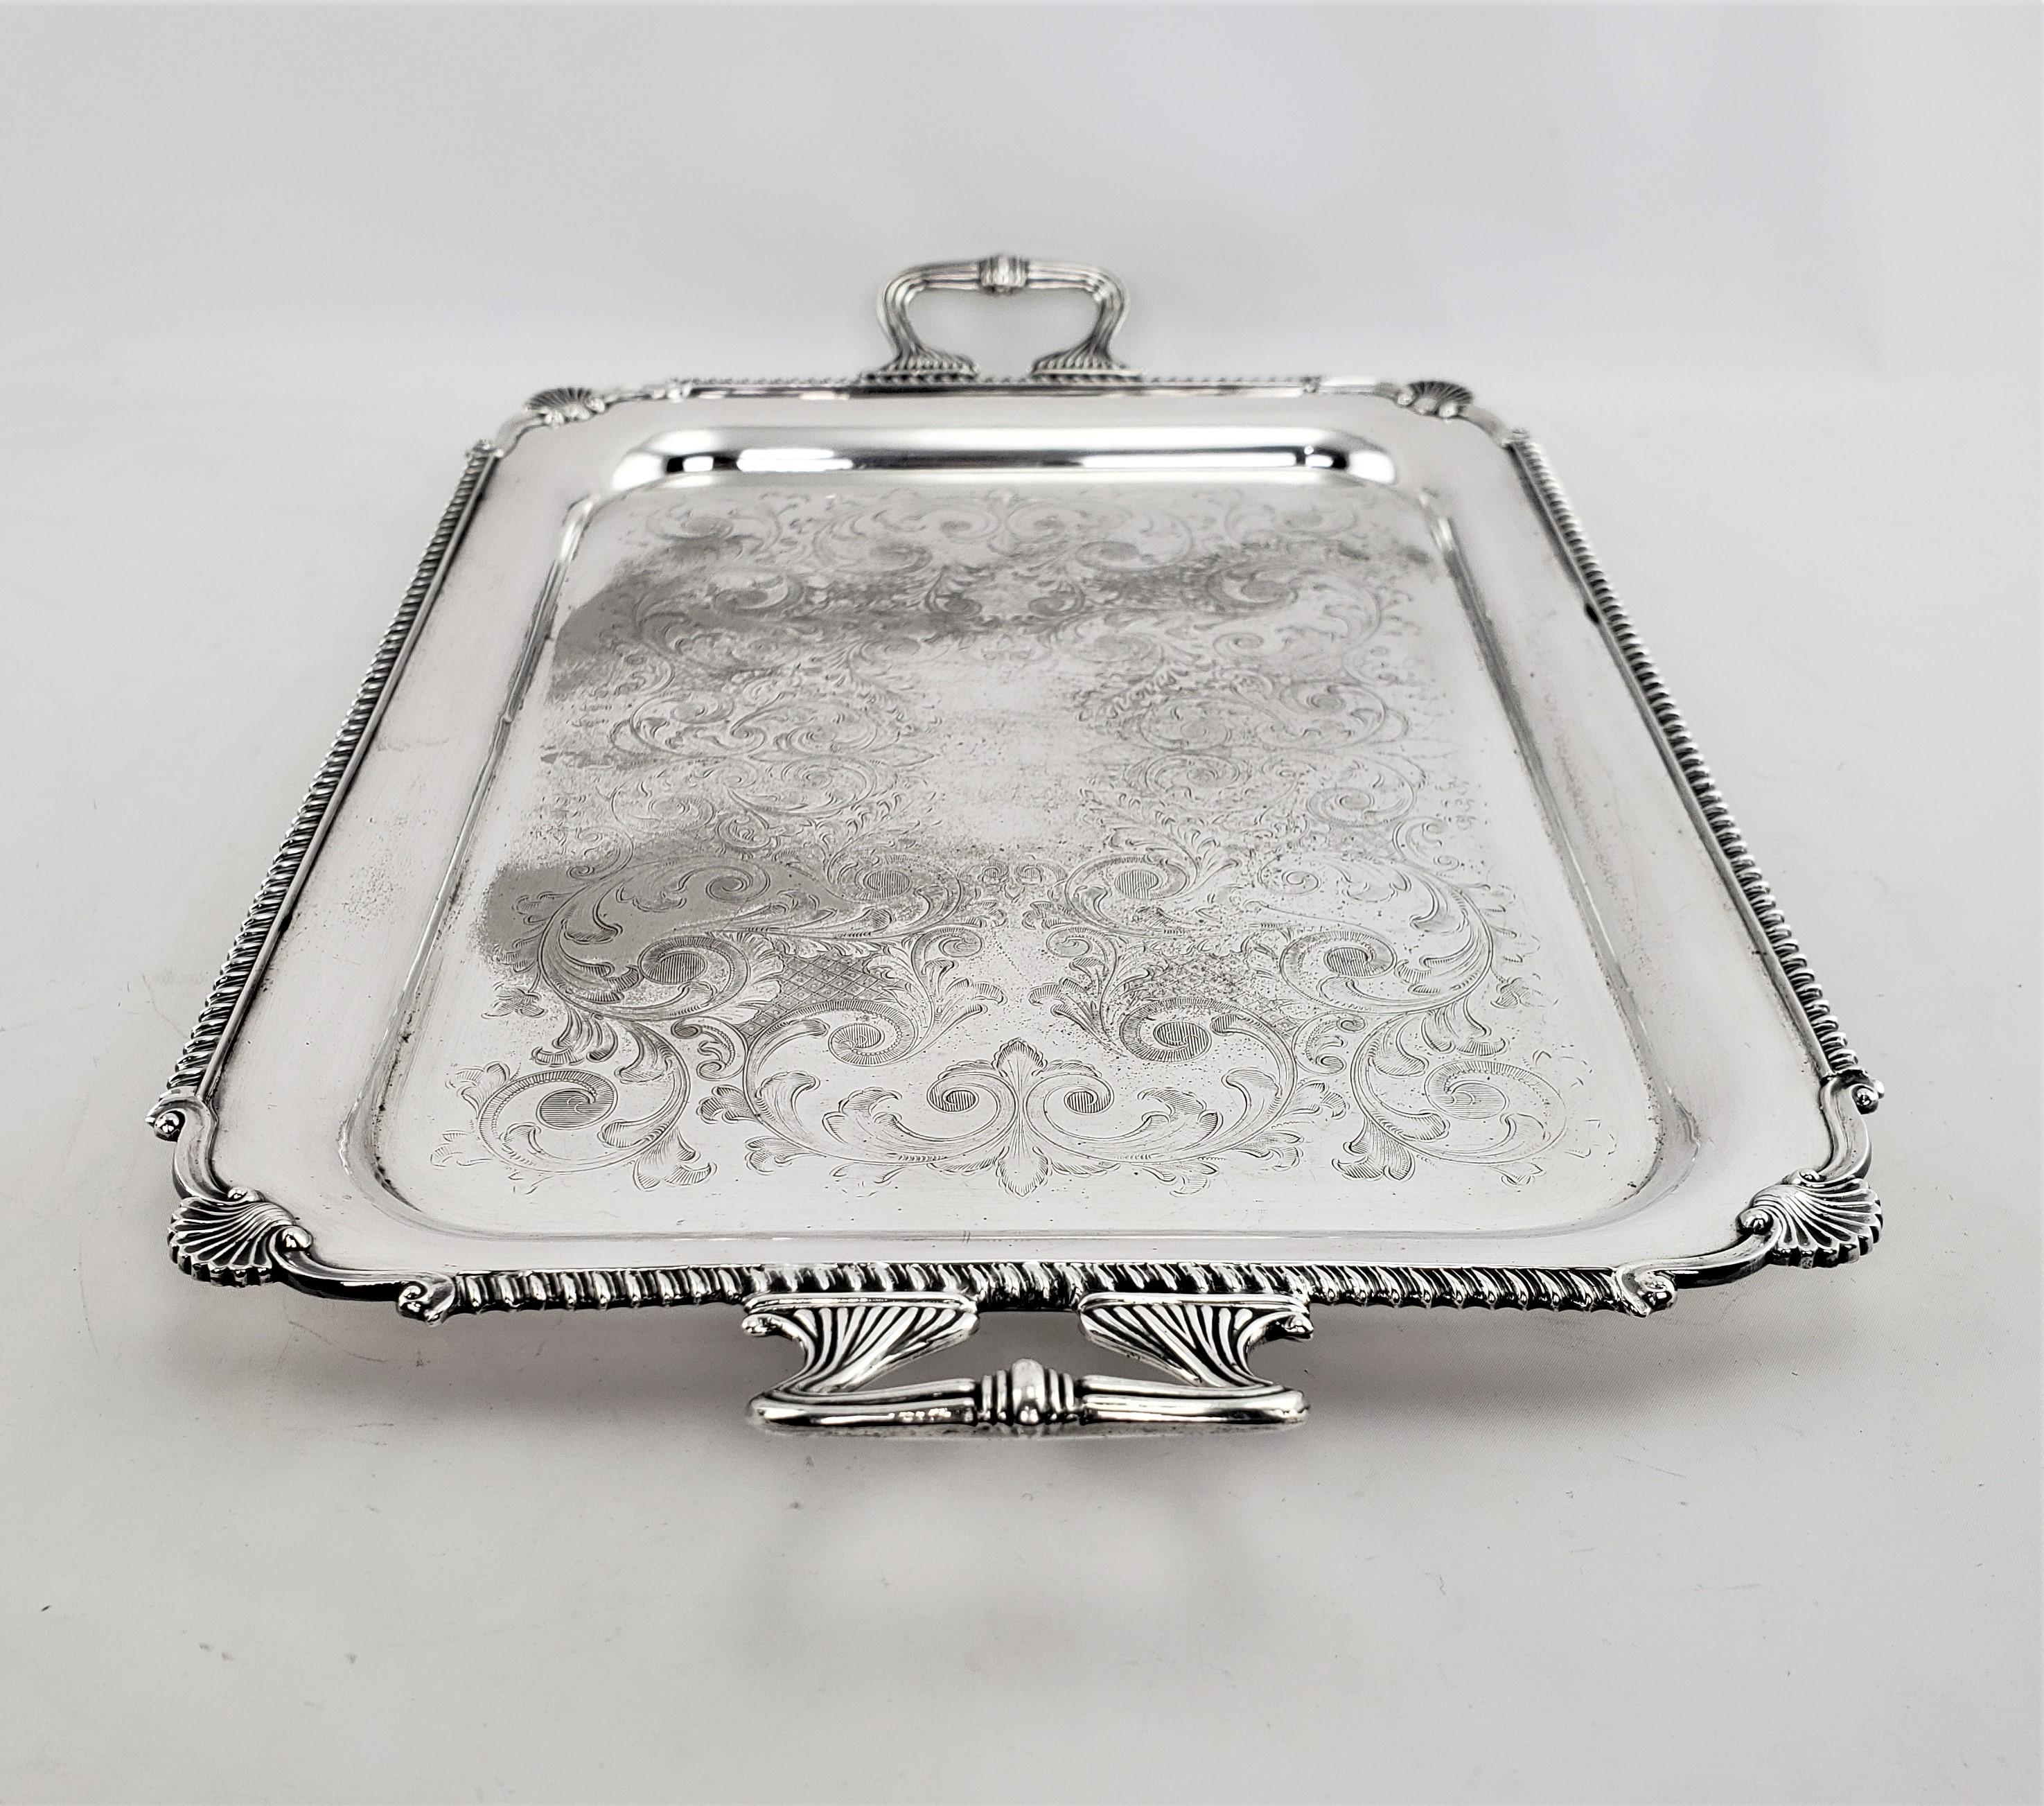 20th Century Large Antique English Edwardian Styled Rectangular Silver Plated Serving Tray